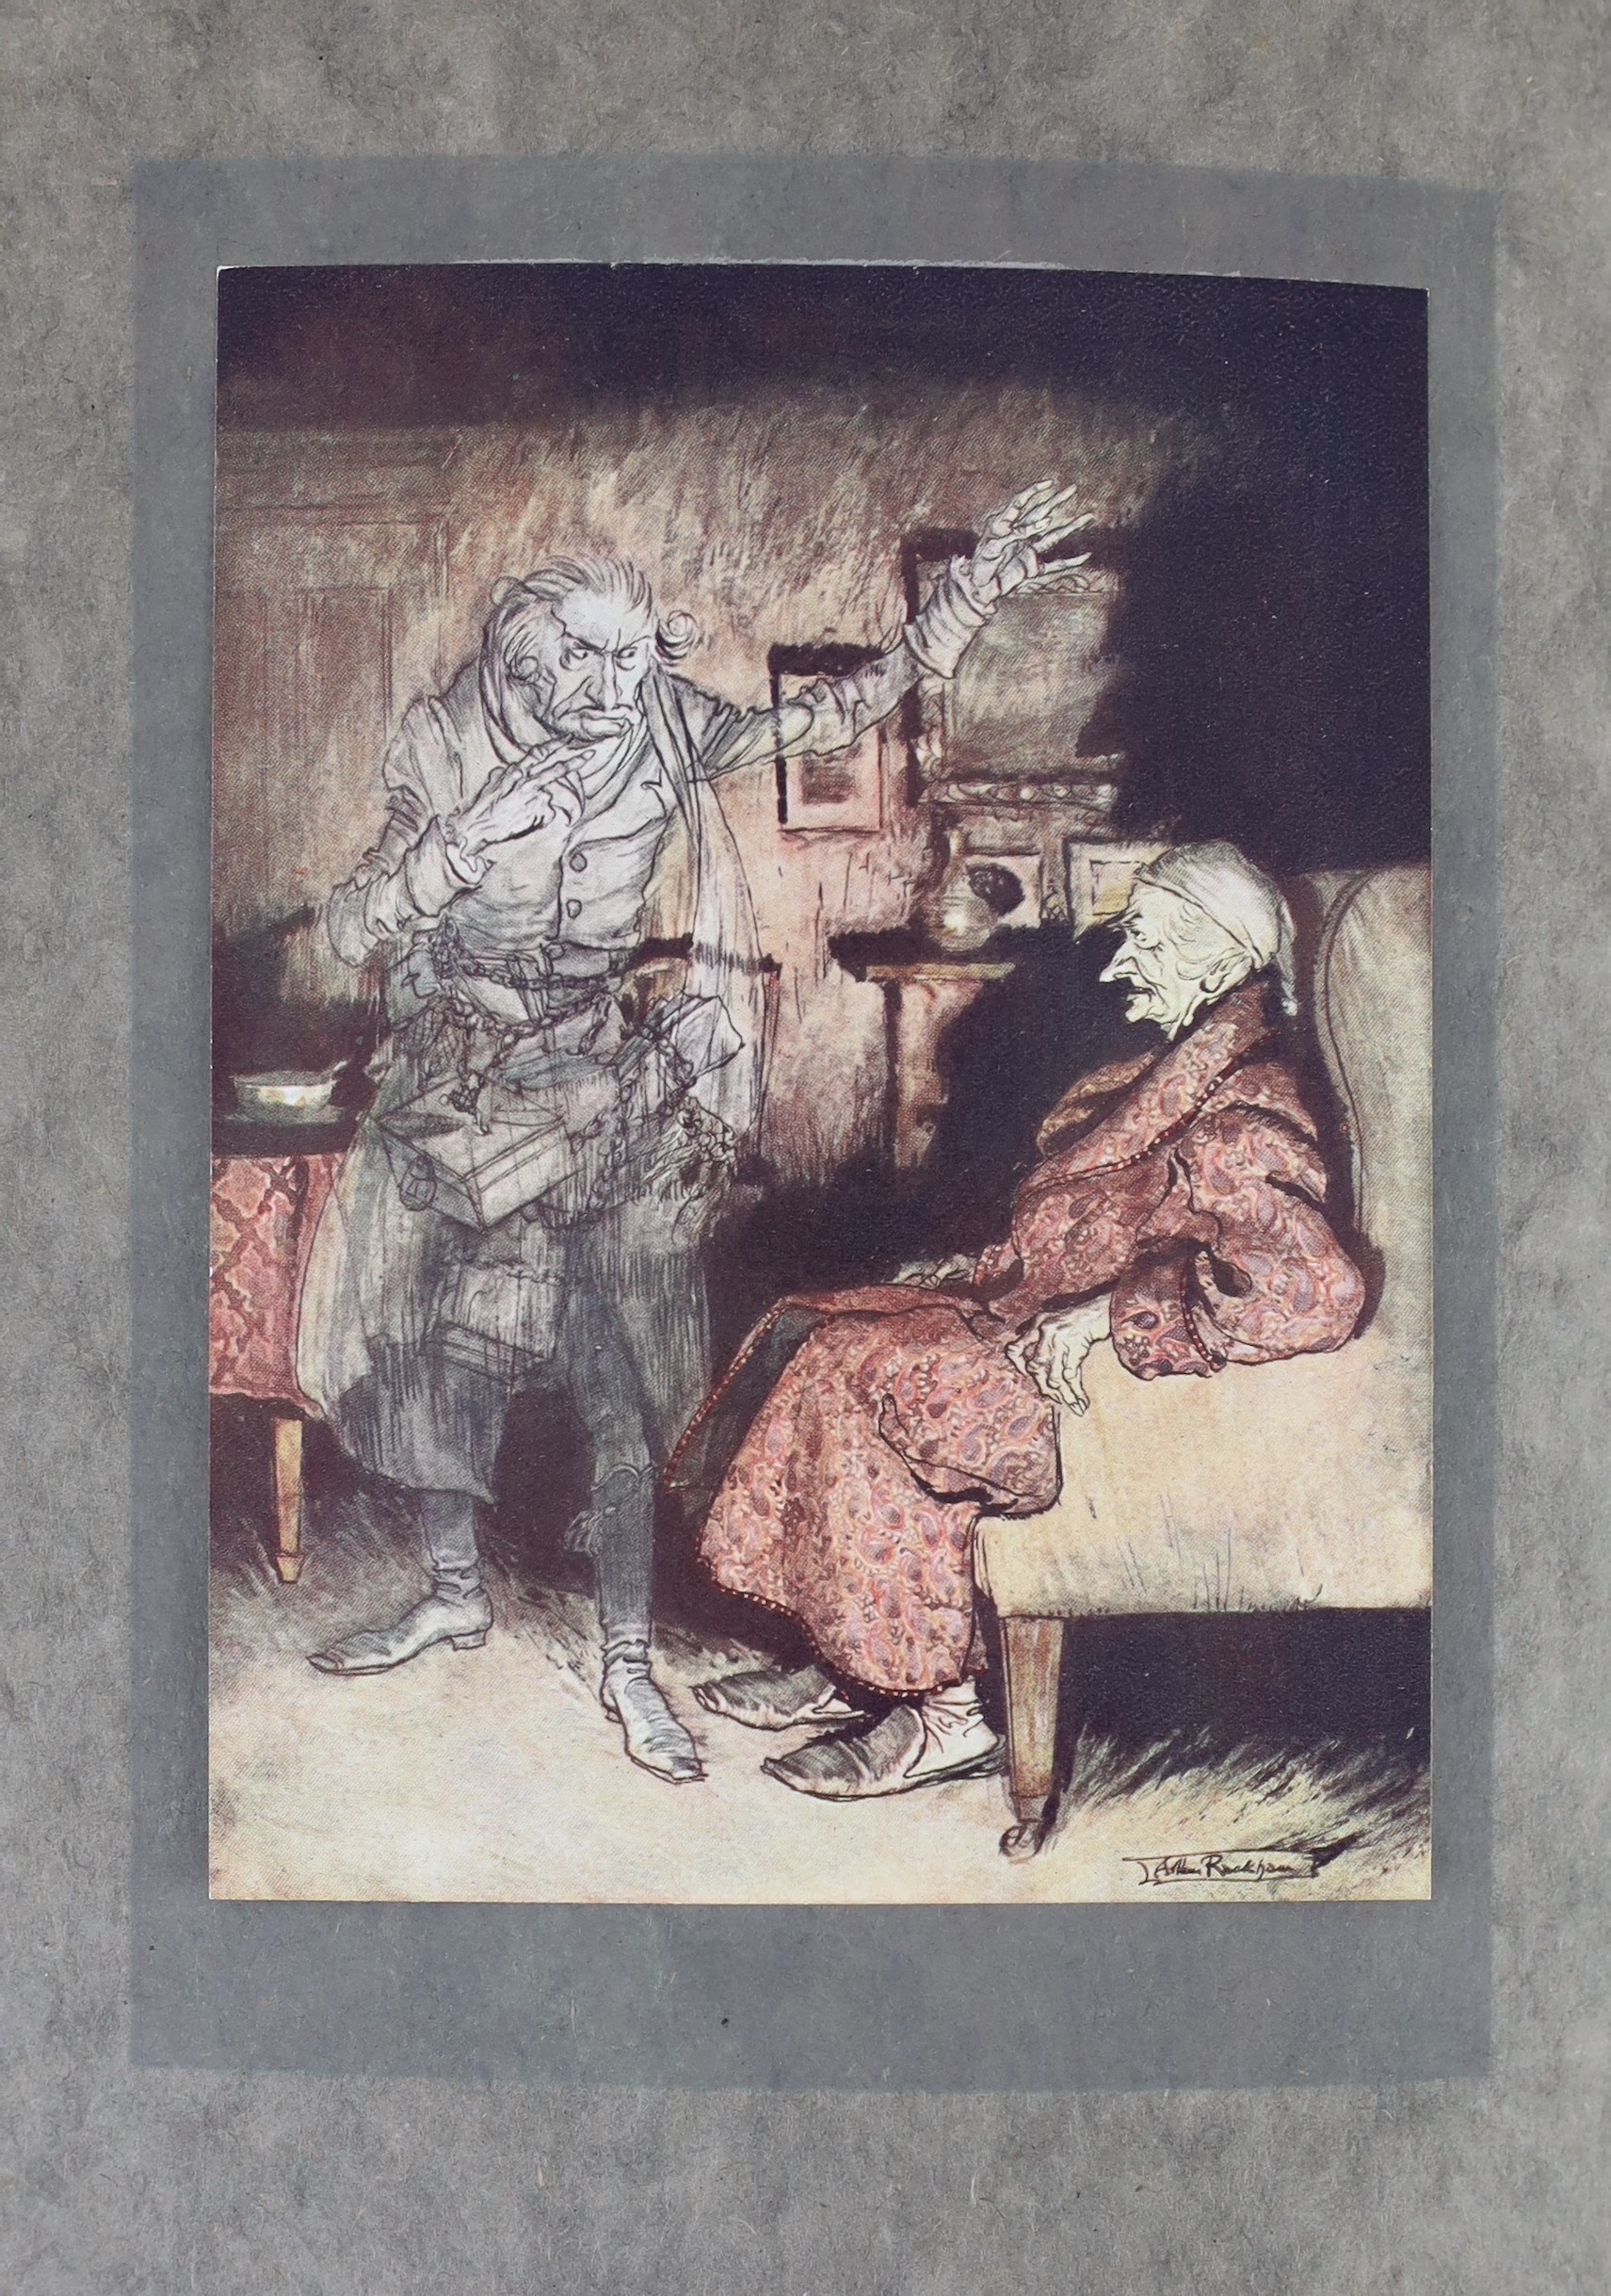 Dickens, Charles - A Christmas Carol. Limited edition (of 500 numbered copies signed by the artist, Arthur Rackham), pictorial title, 12 coloured plates (mounted and with captioned guards) and b/w. text illus. (some full